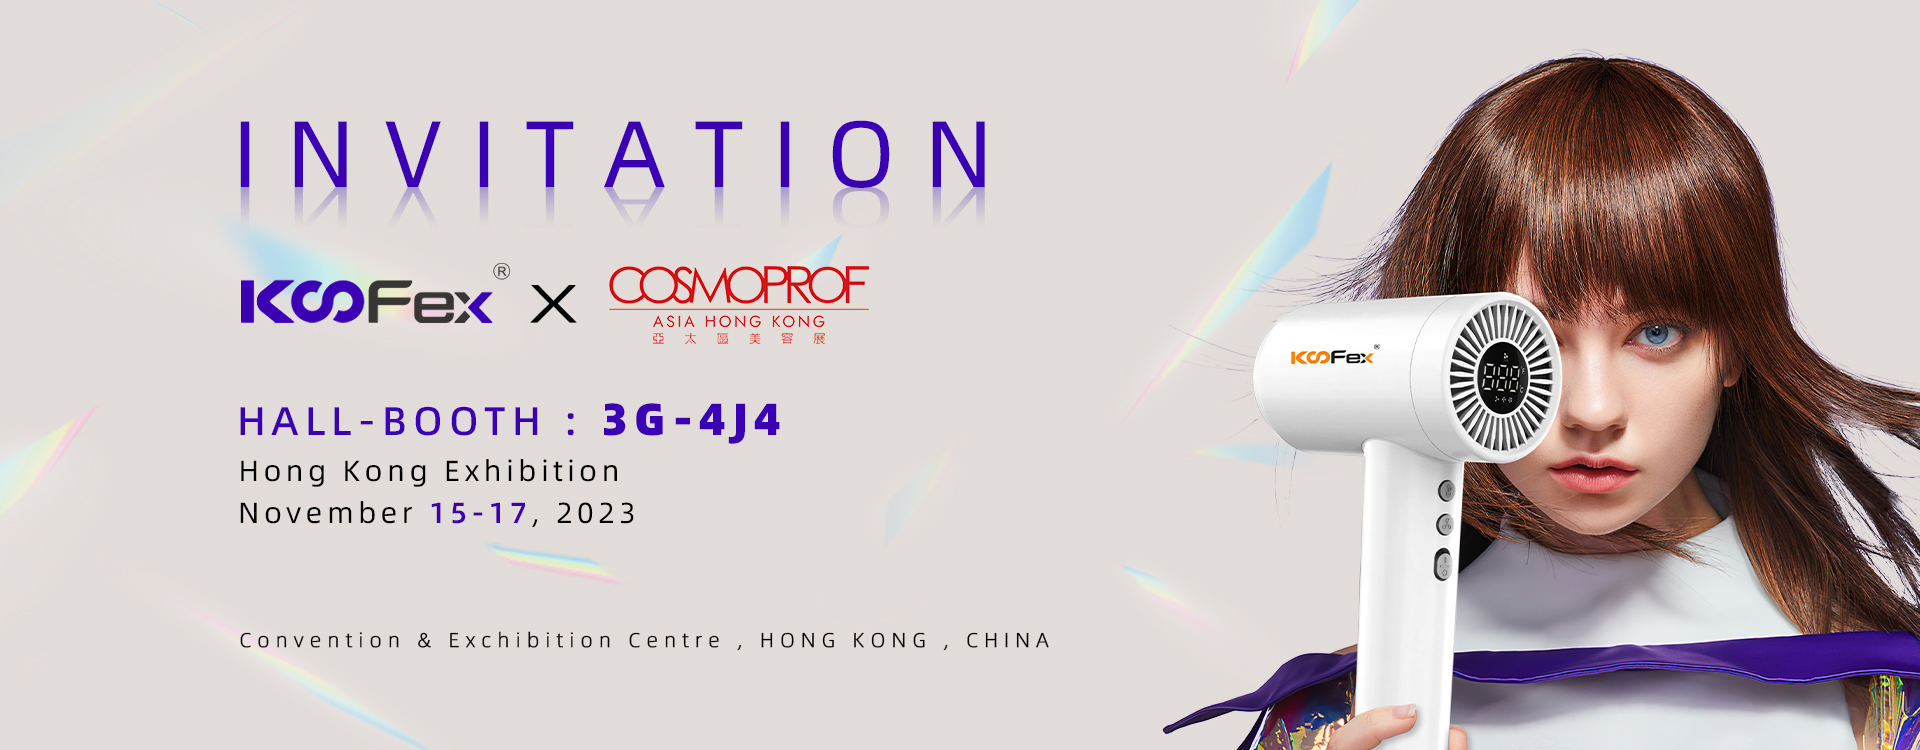 Koofex chose Cosmoprof Asia Digital Week to launch a new high-tech leafless hair dryer, providing visitors with a new blow-drying experience.